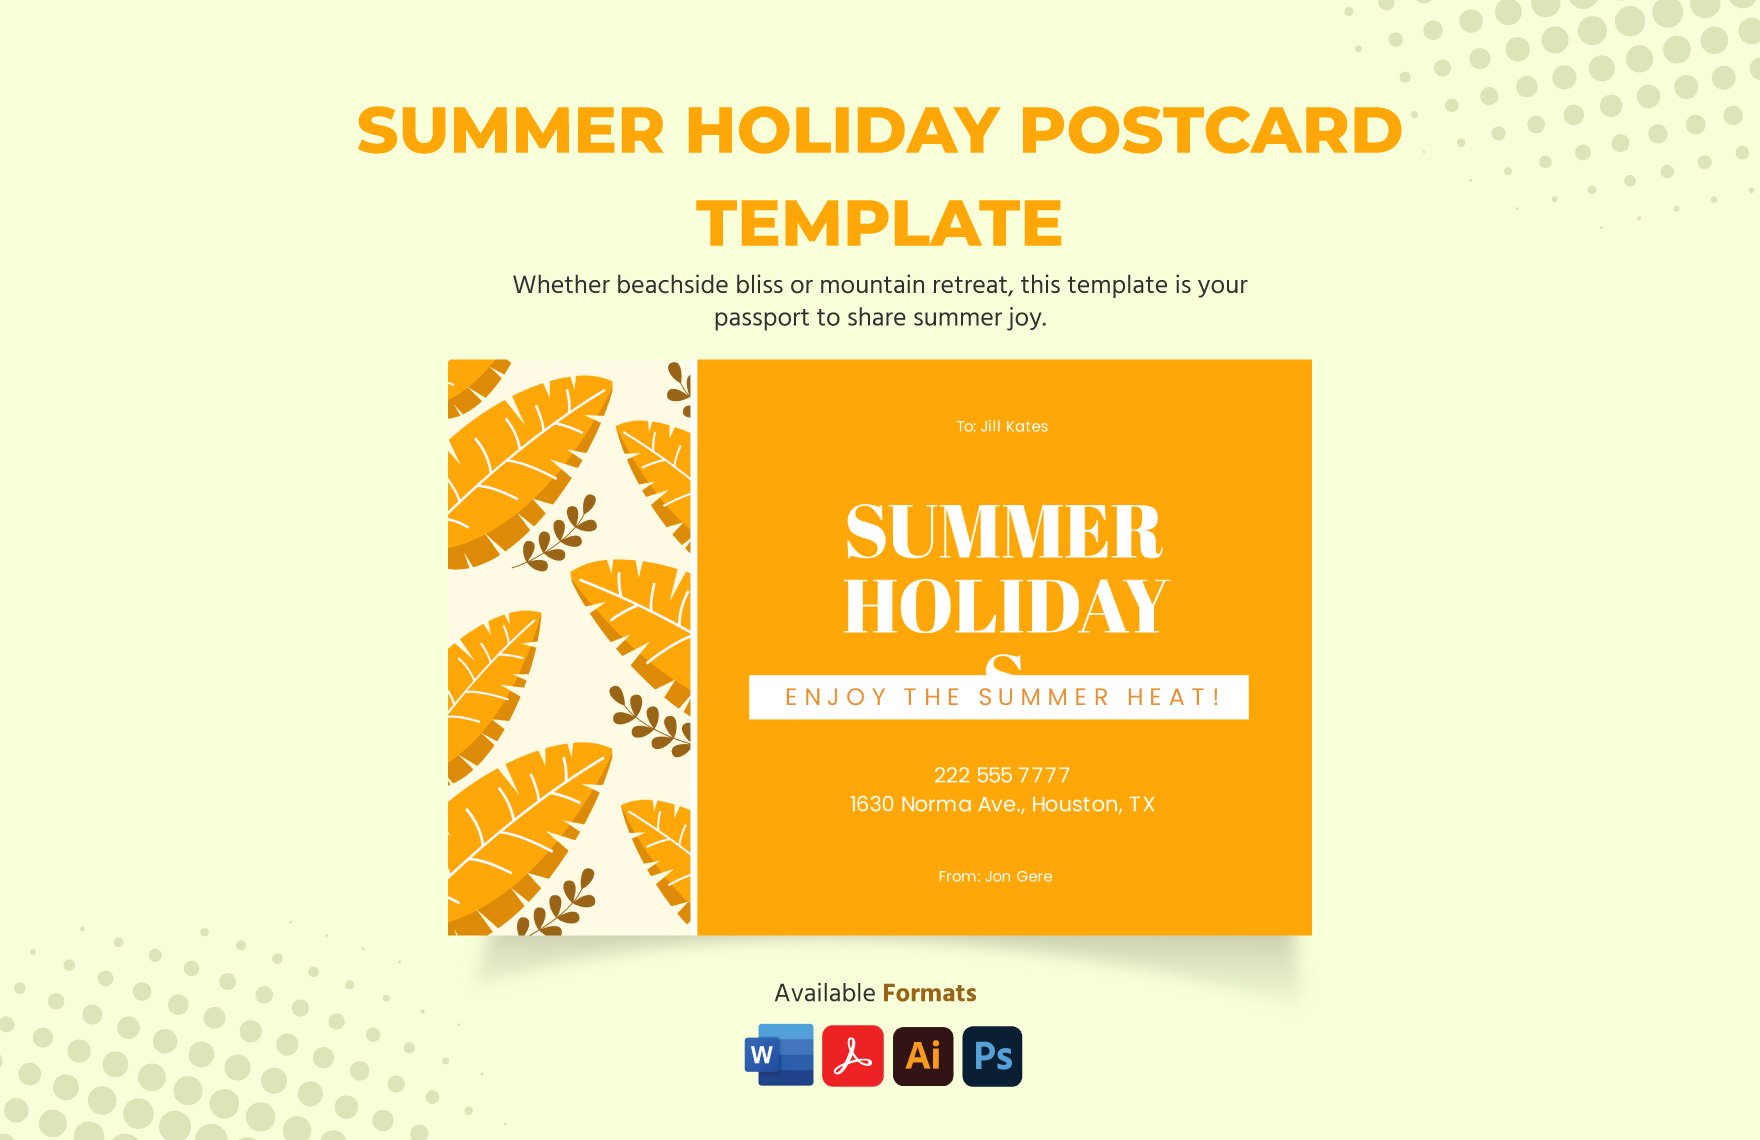 Summer Holiday Postcard Template